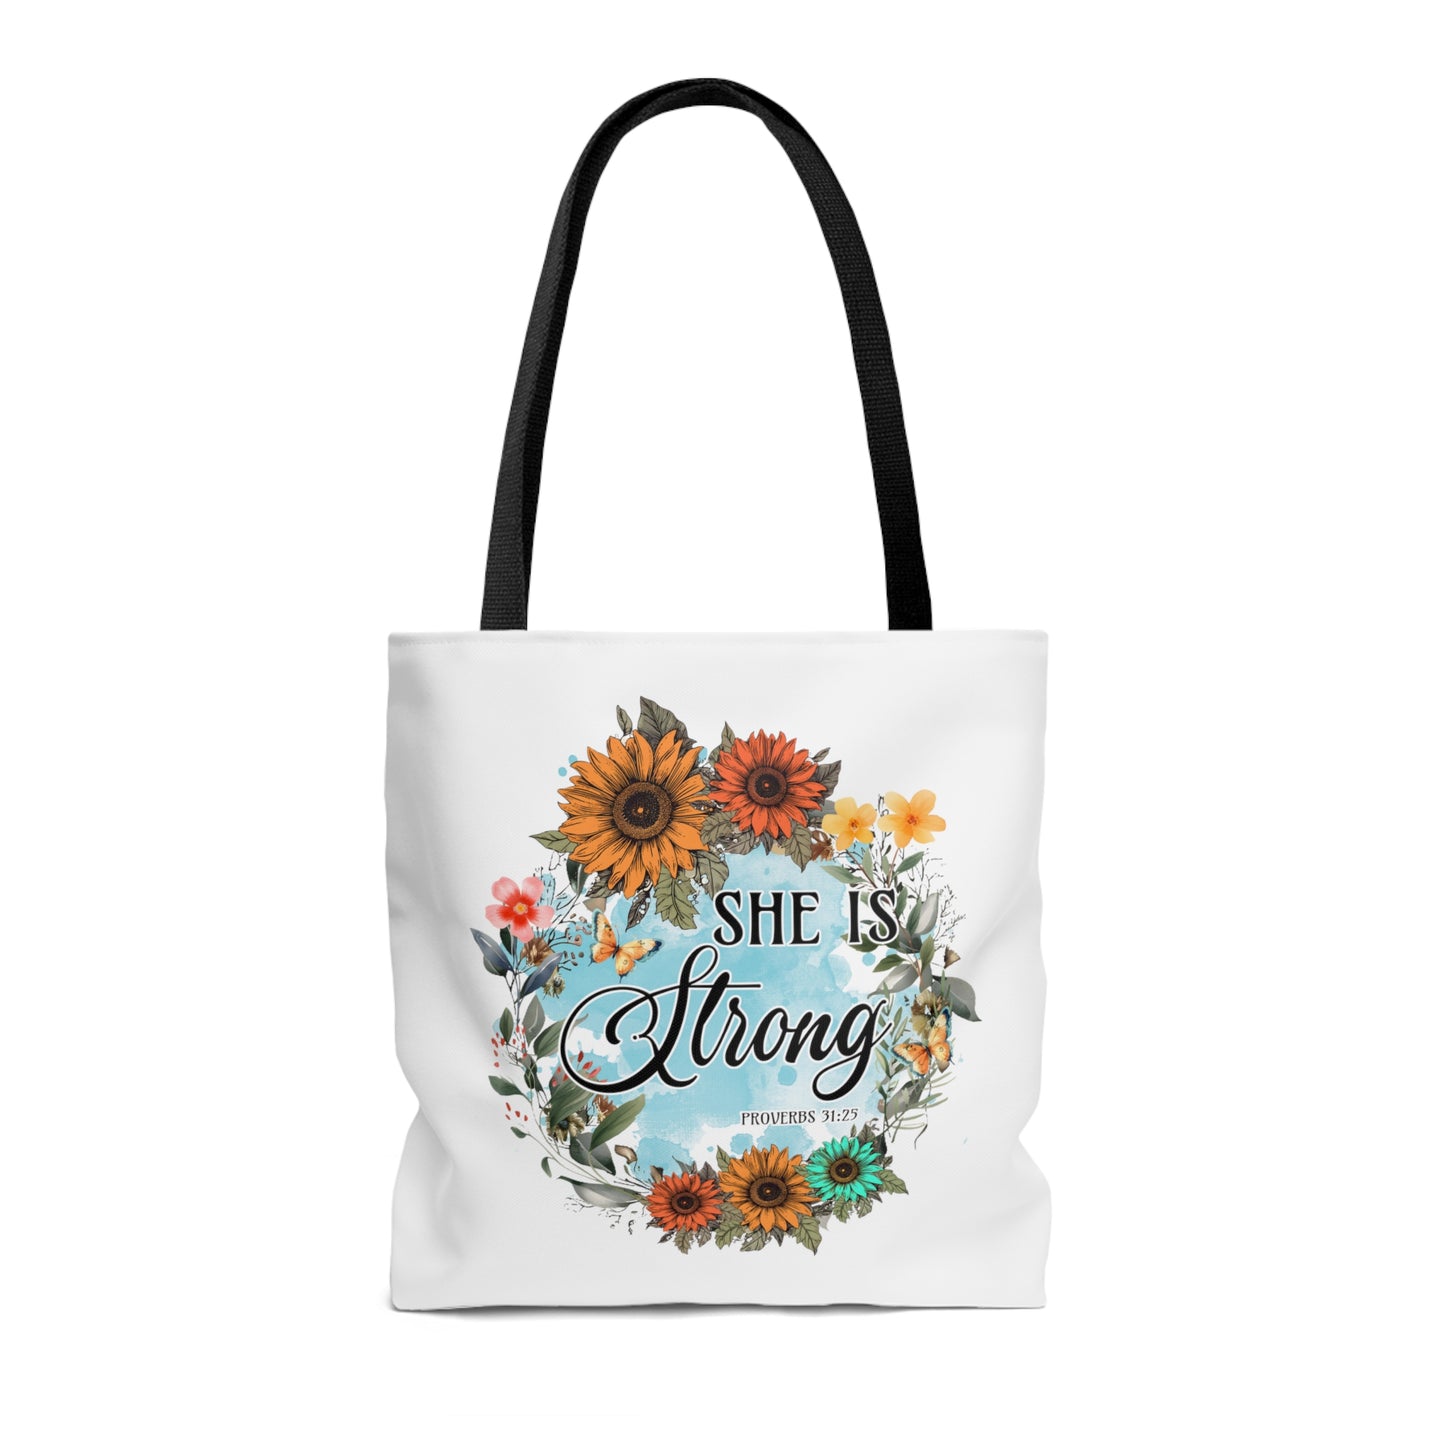 She is Strong Inspirational Tote Bag, Christian Gifts